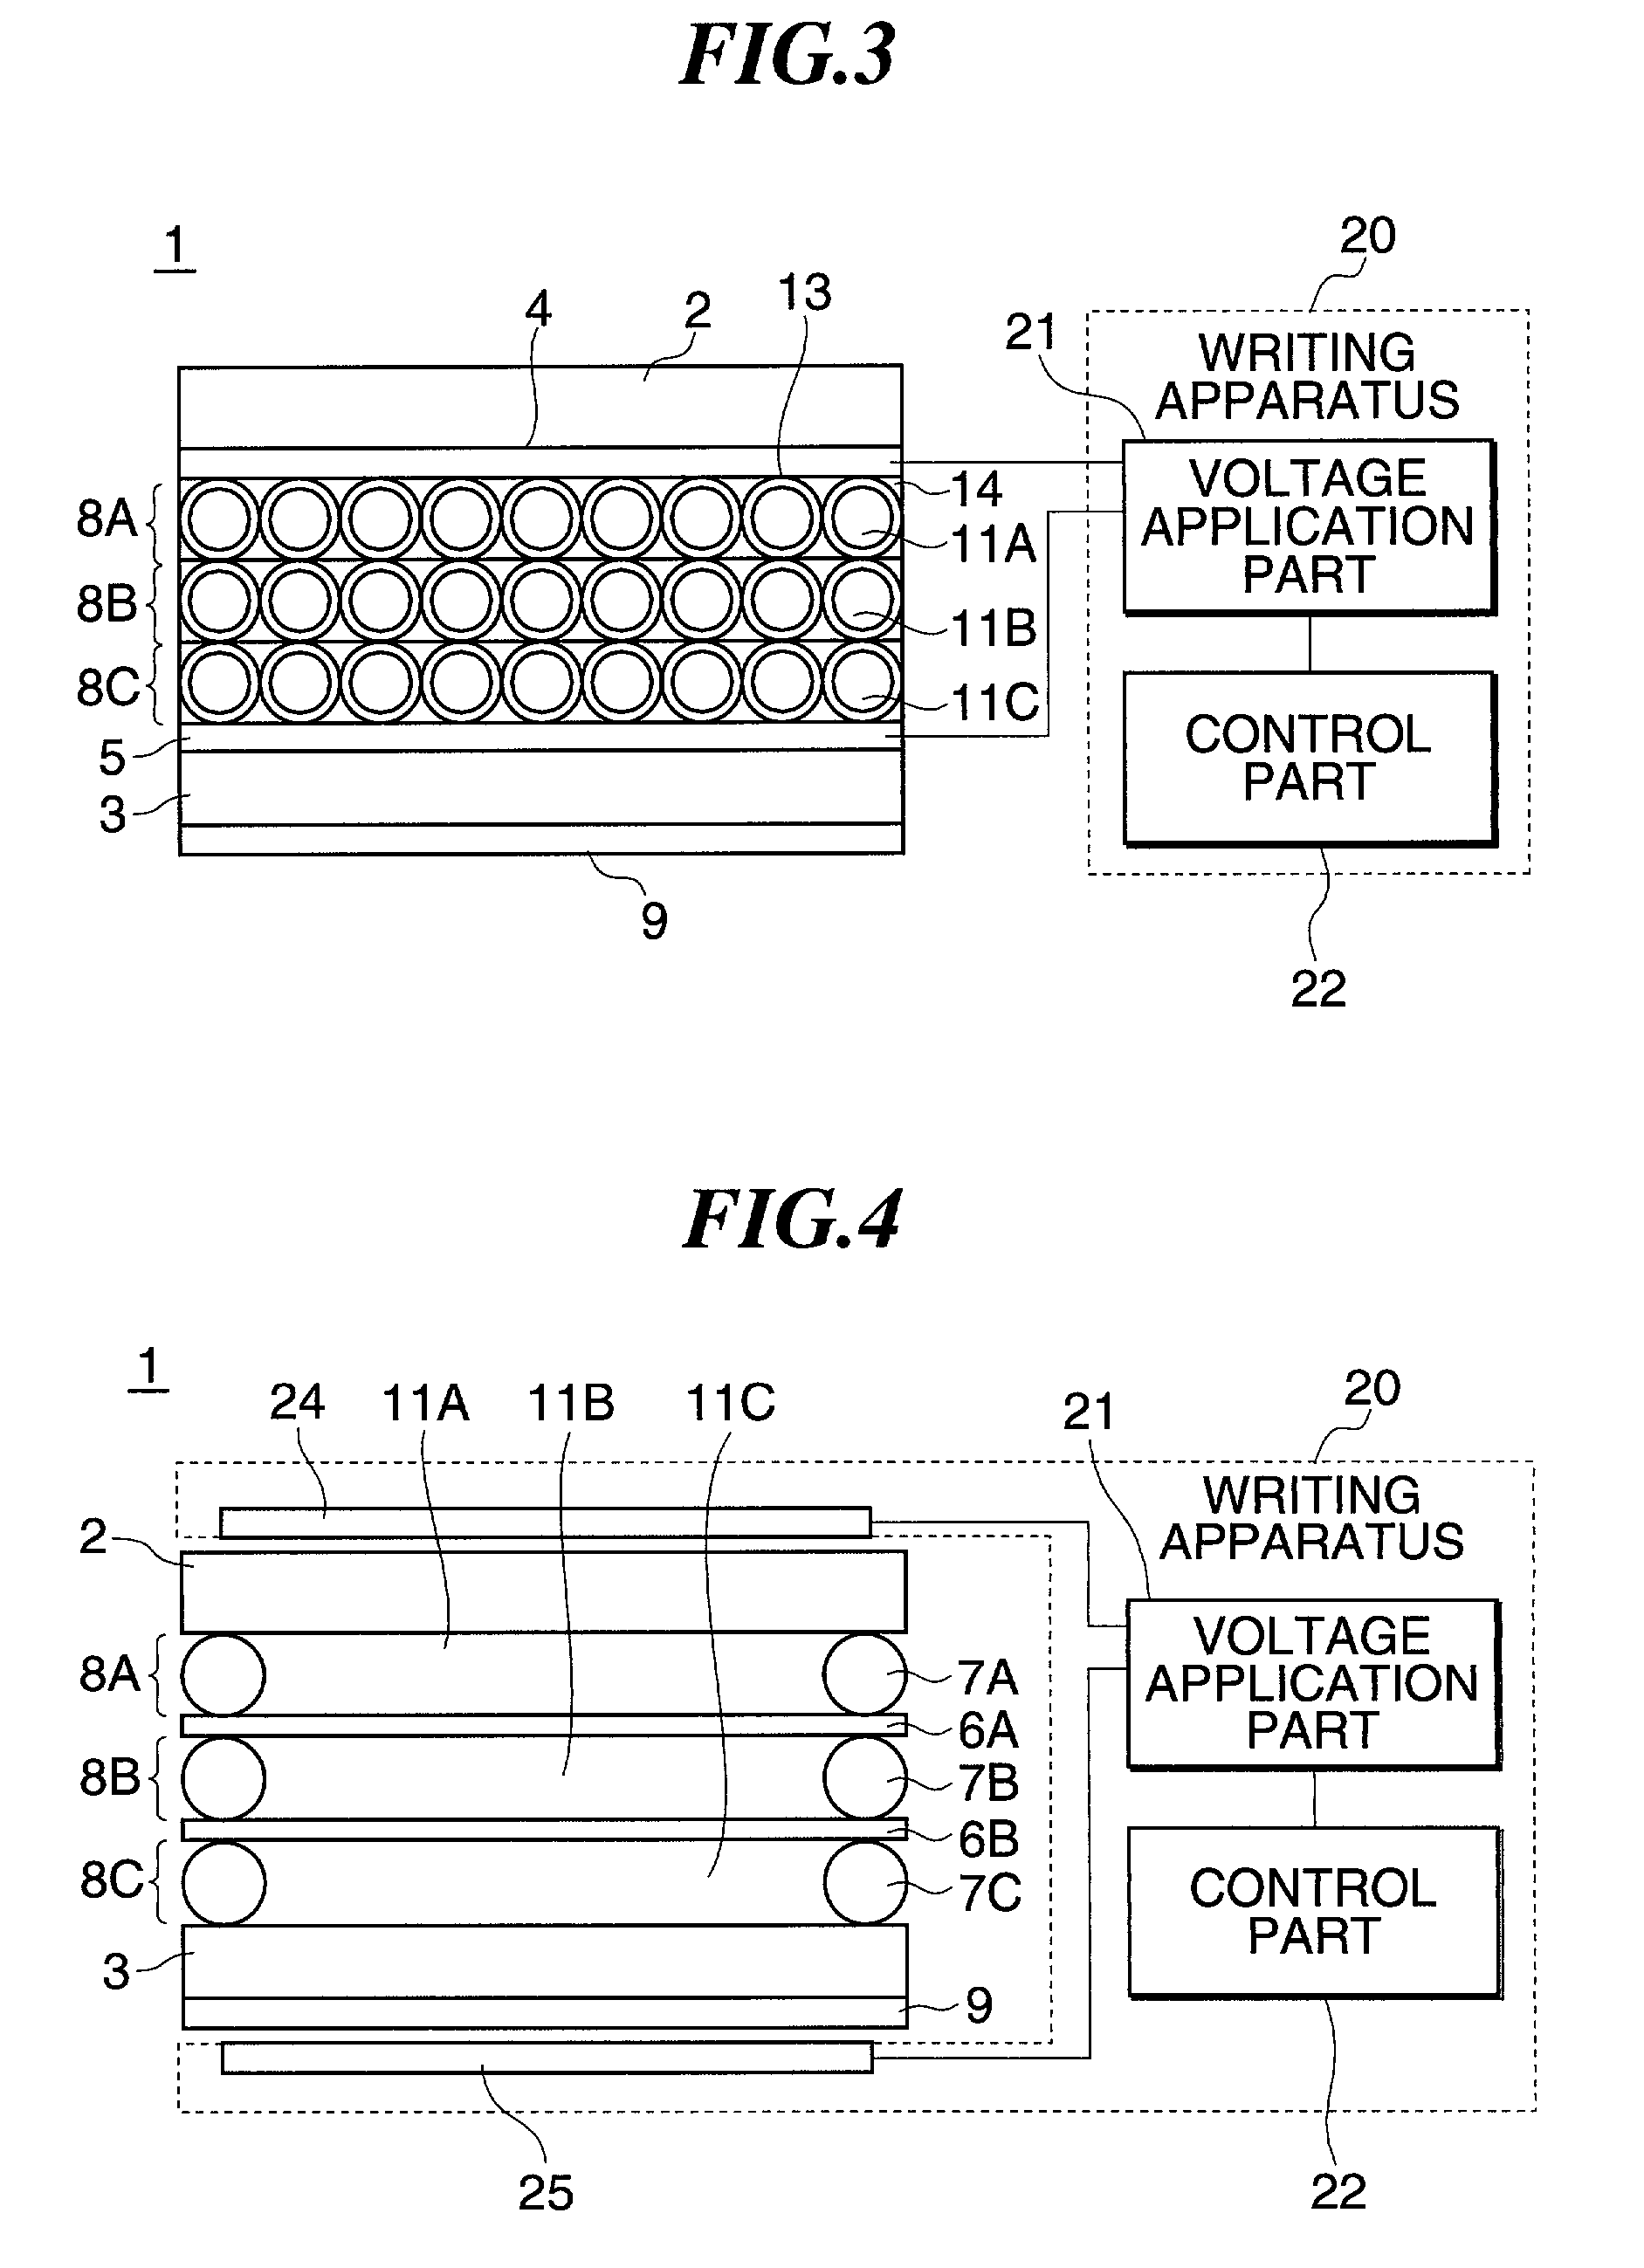 Display element, writing method and writing apparatus